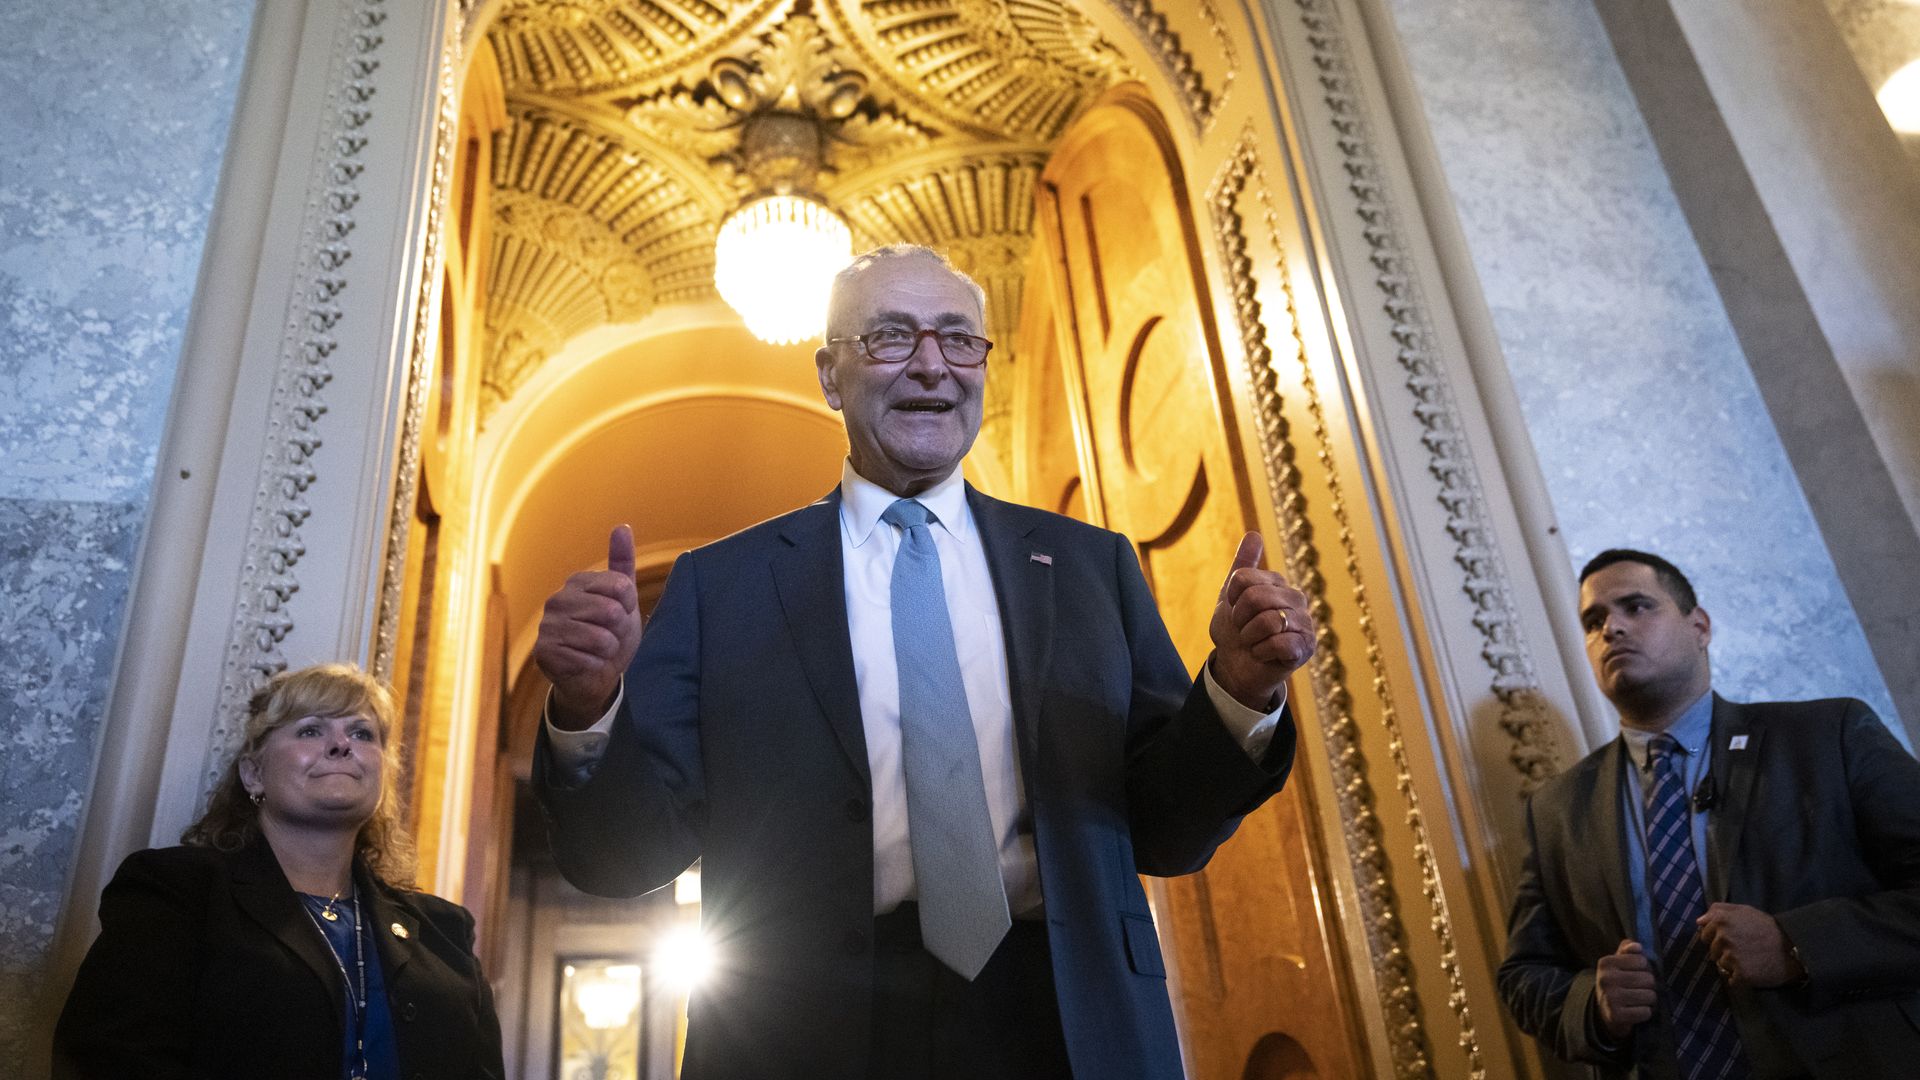 Senate Majority Leader Chuck Schumer (D-N.Y.) leaving the leaves the Senate after the passage of the Inflation Reduction Act on Aug. 7.